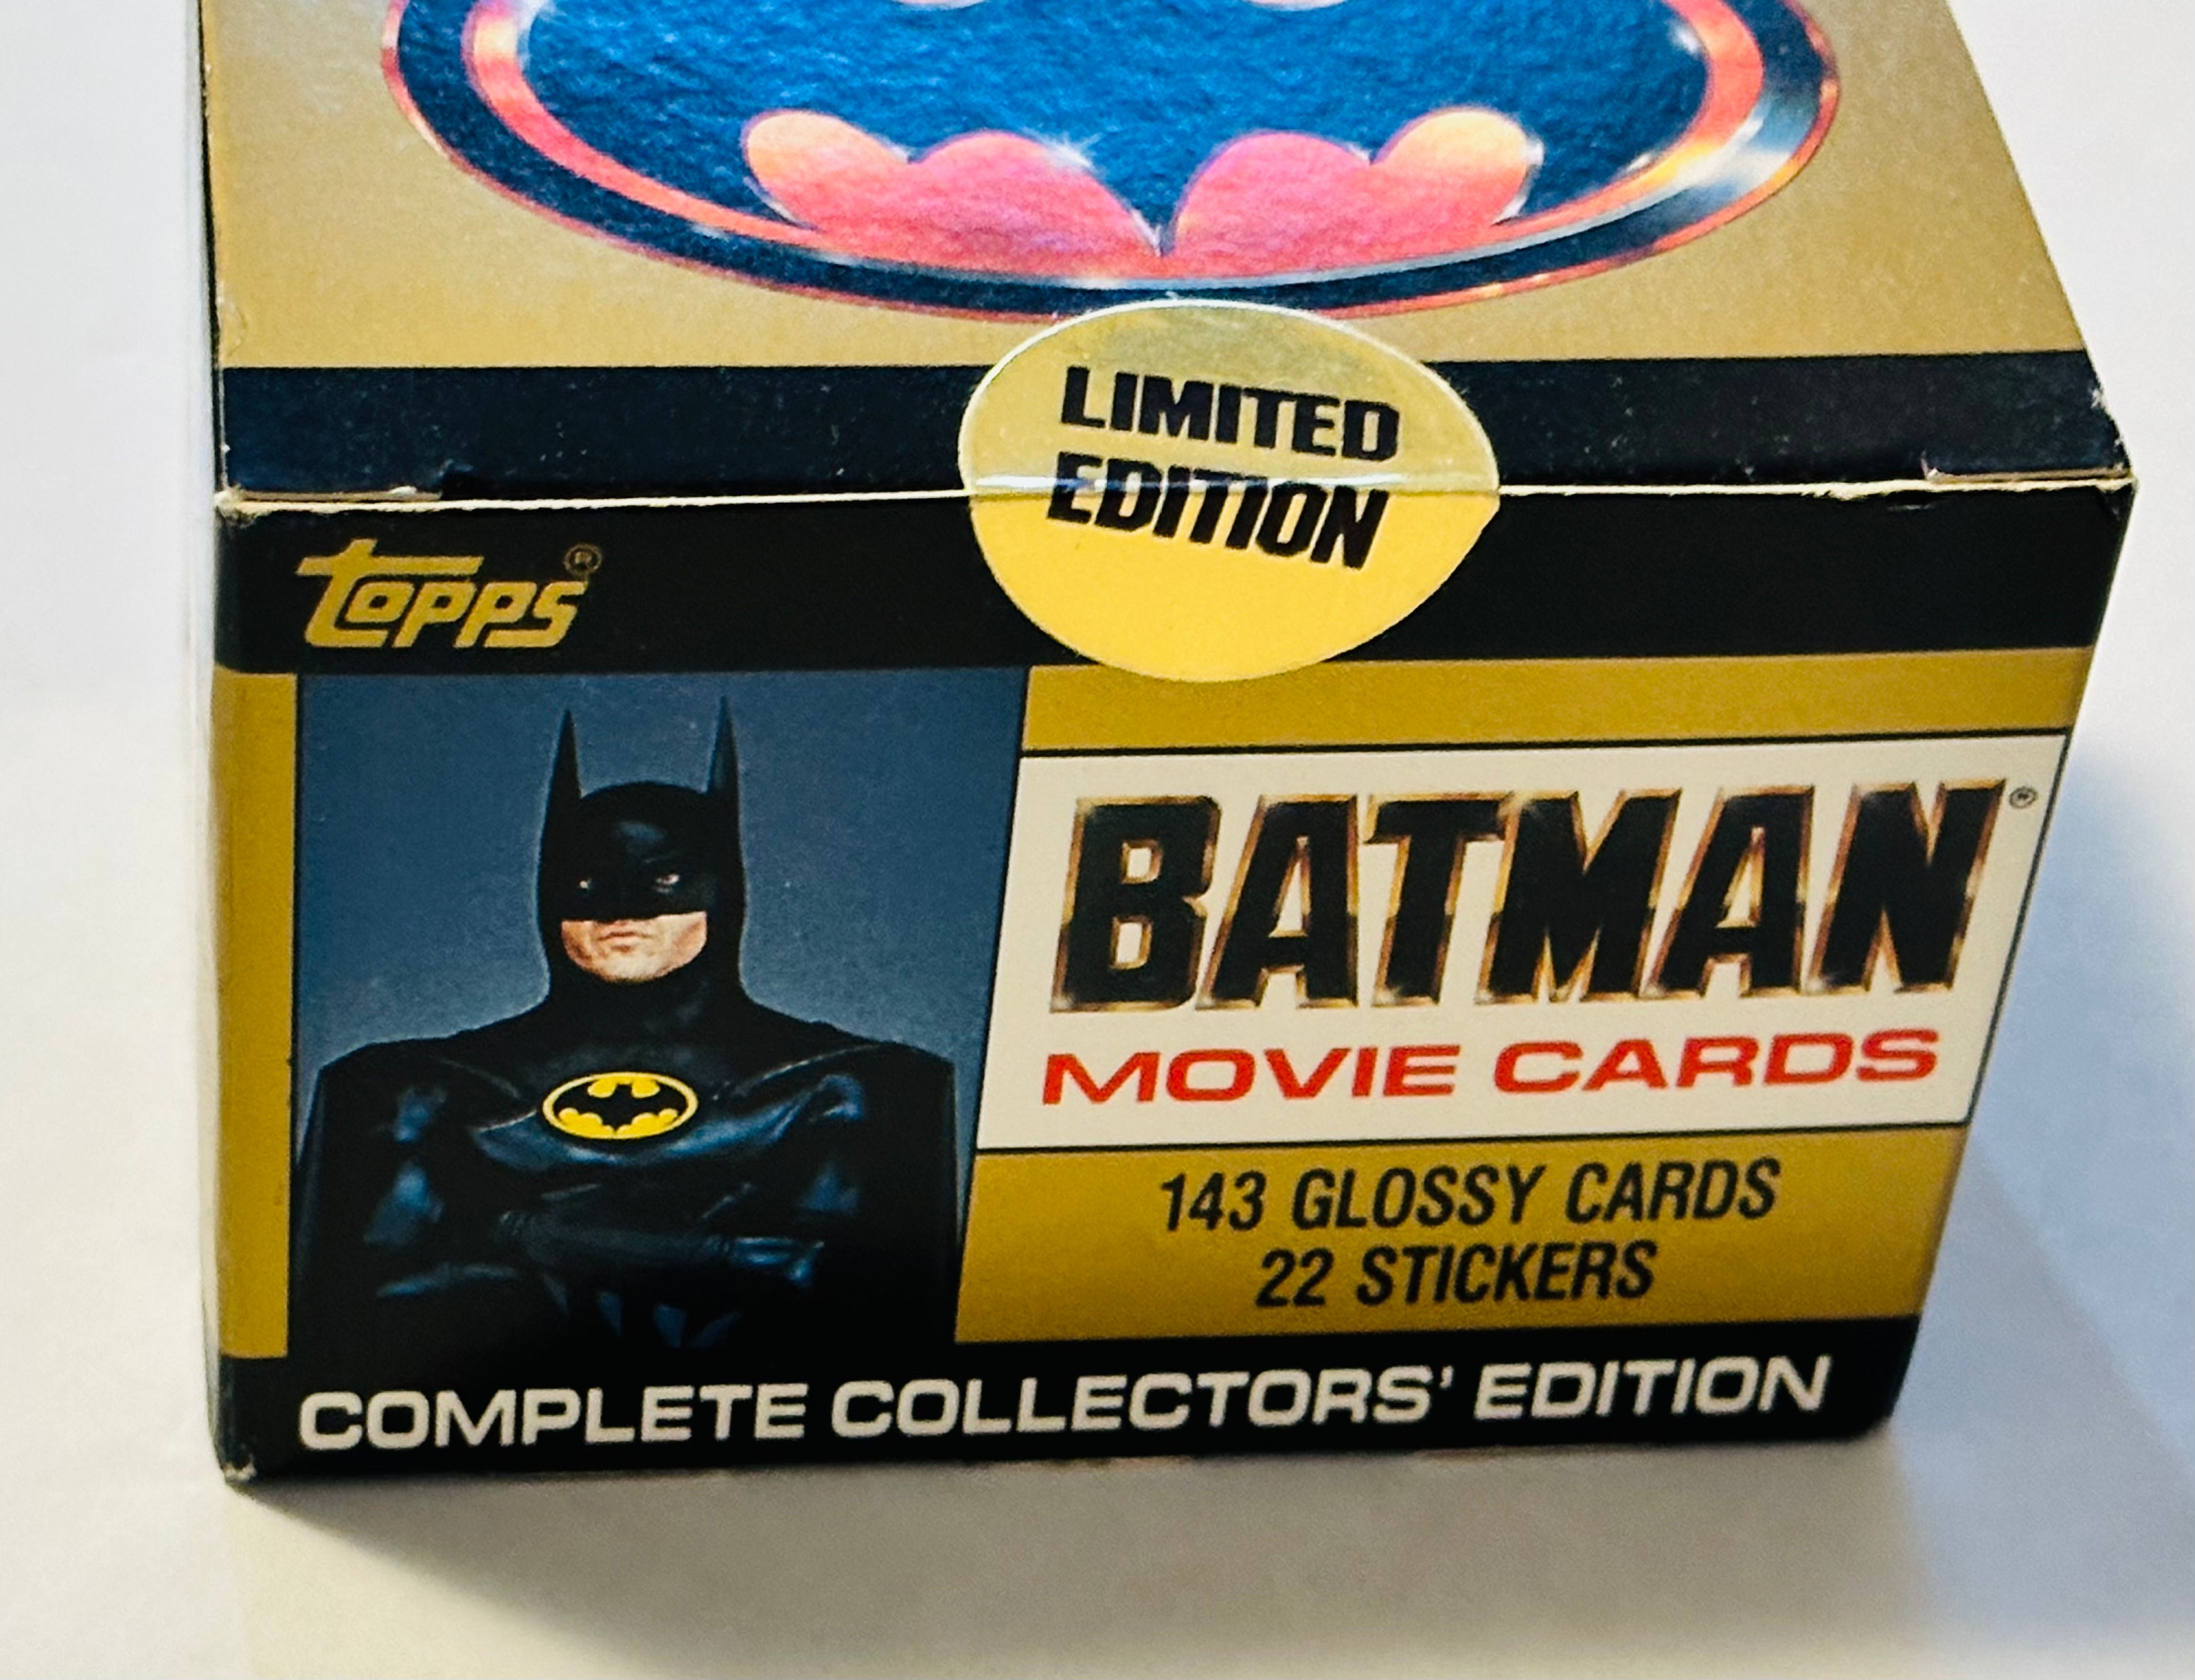 Batman movie deluxe glossy series 1 cards and stickers set in factory box 1989